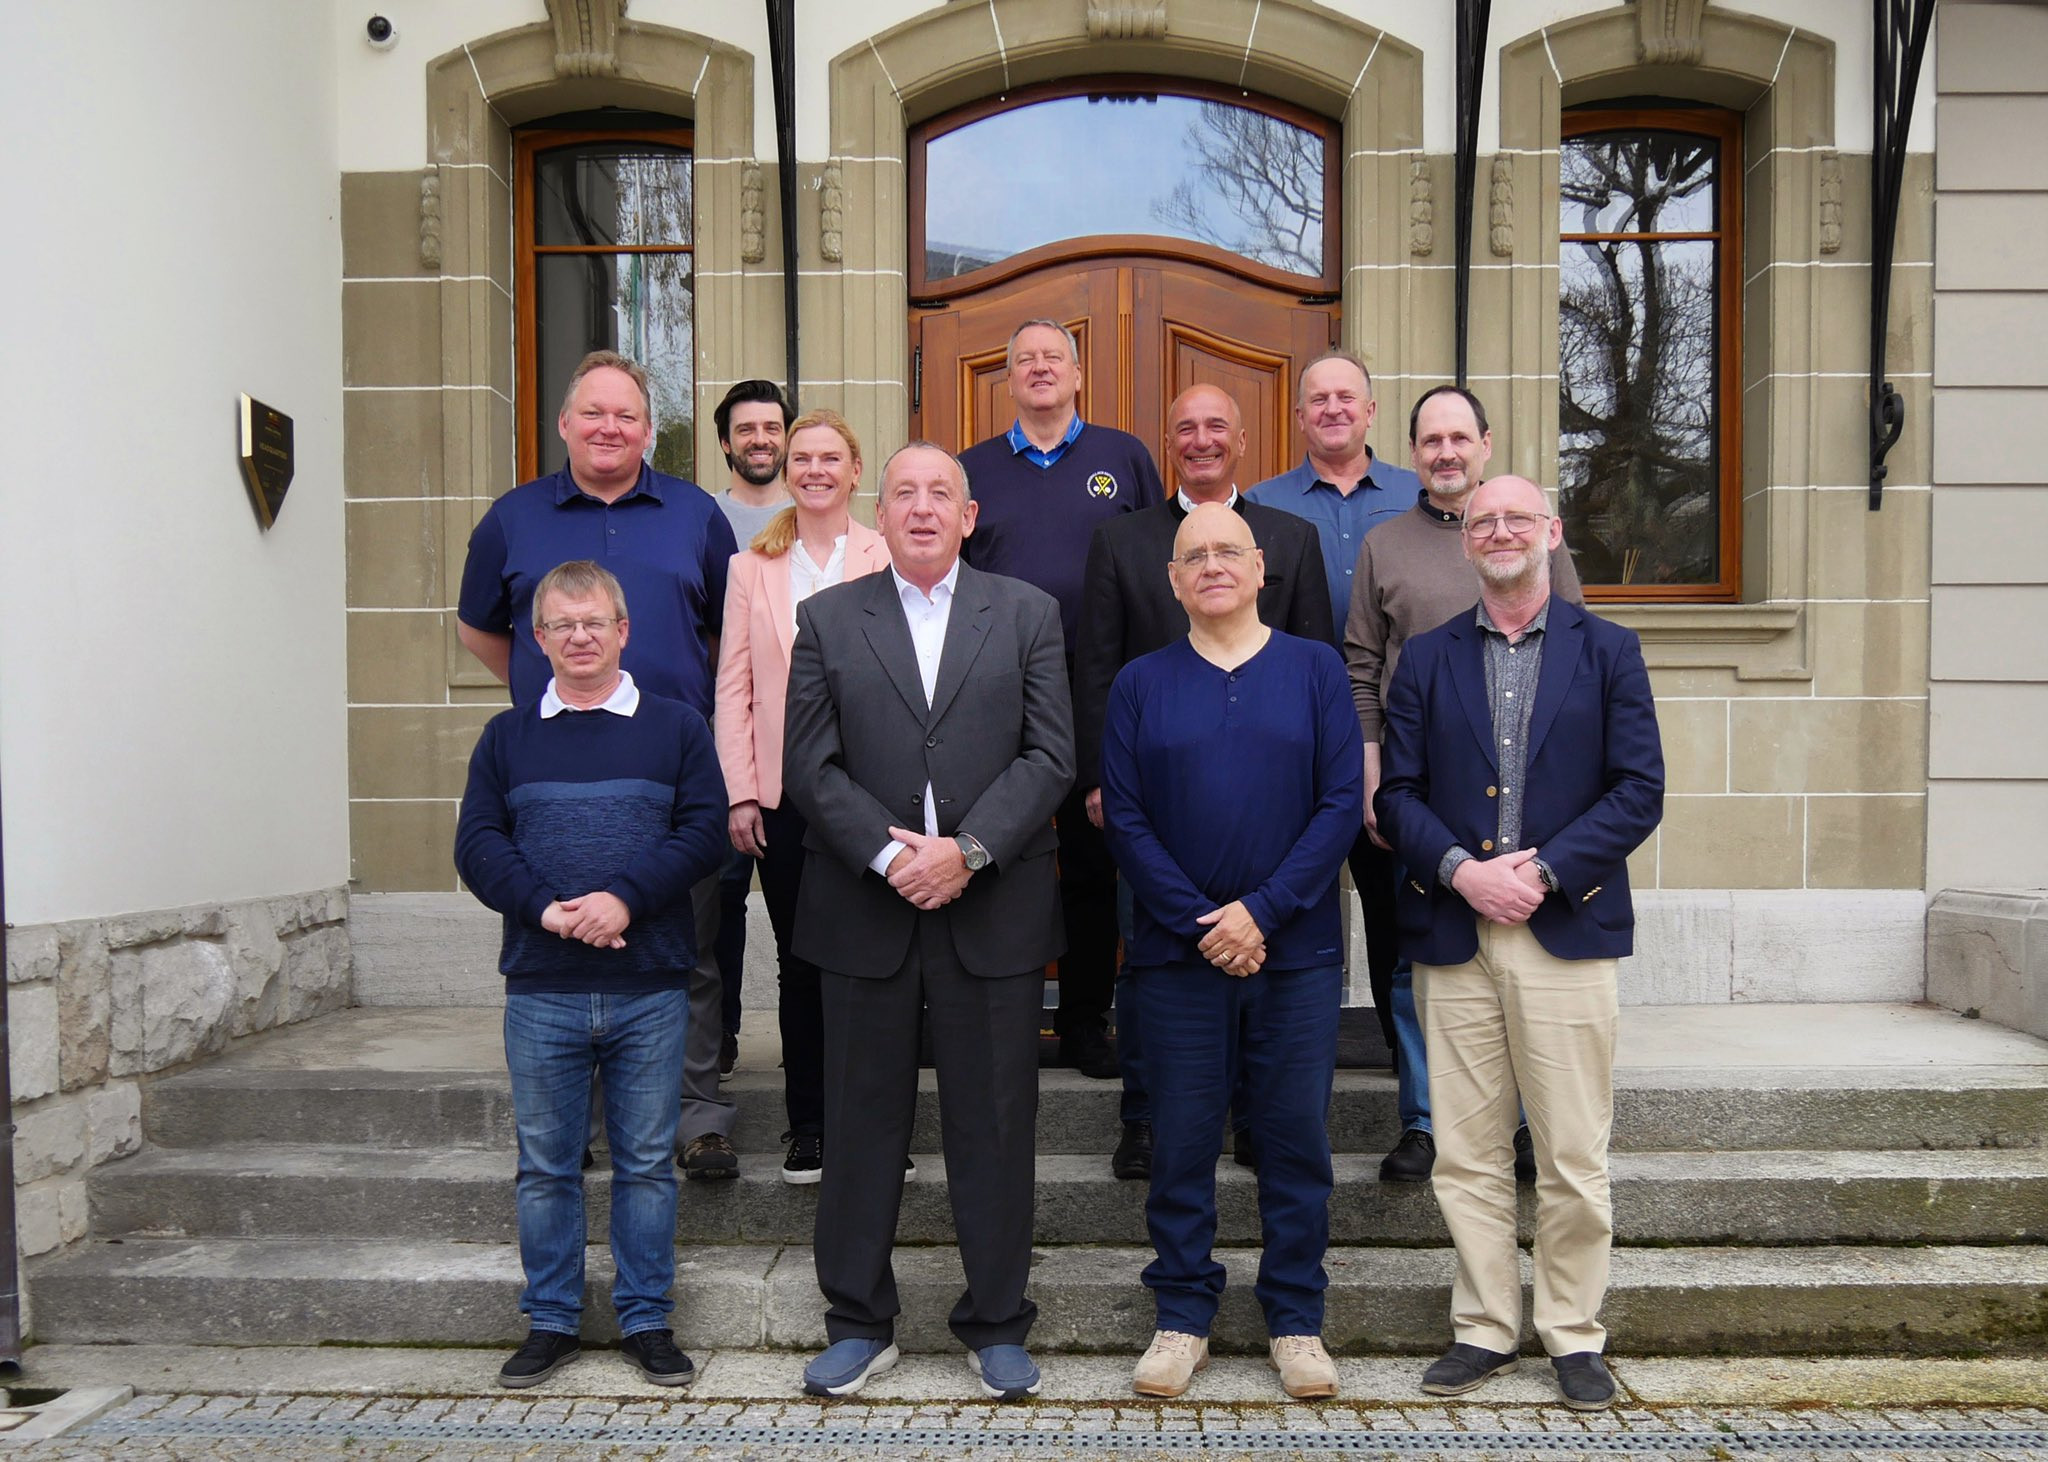 The WBSC Europe Executive Board met in Pully for the first time since being elected ©WBSC